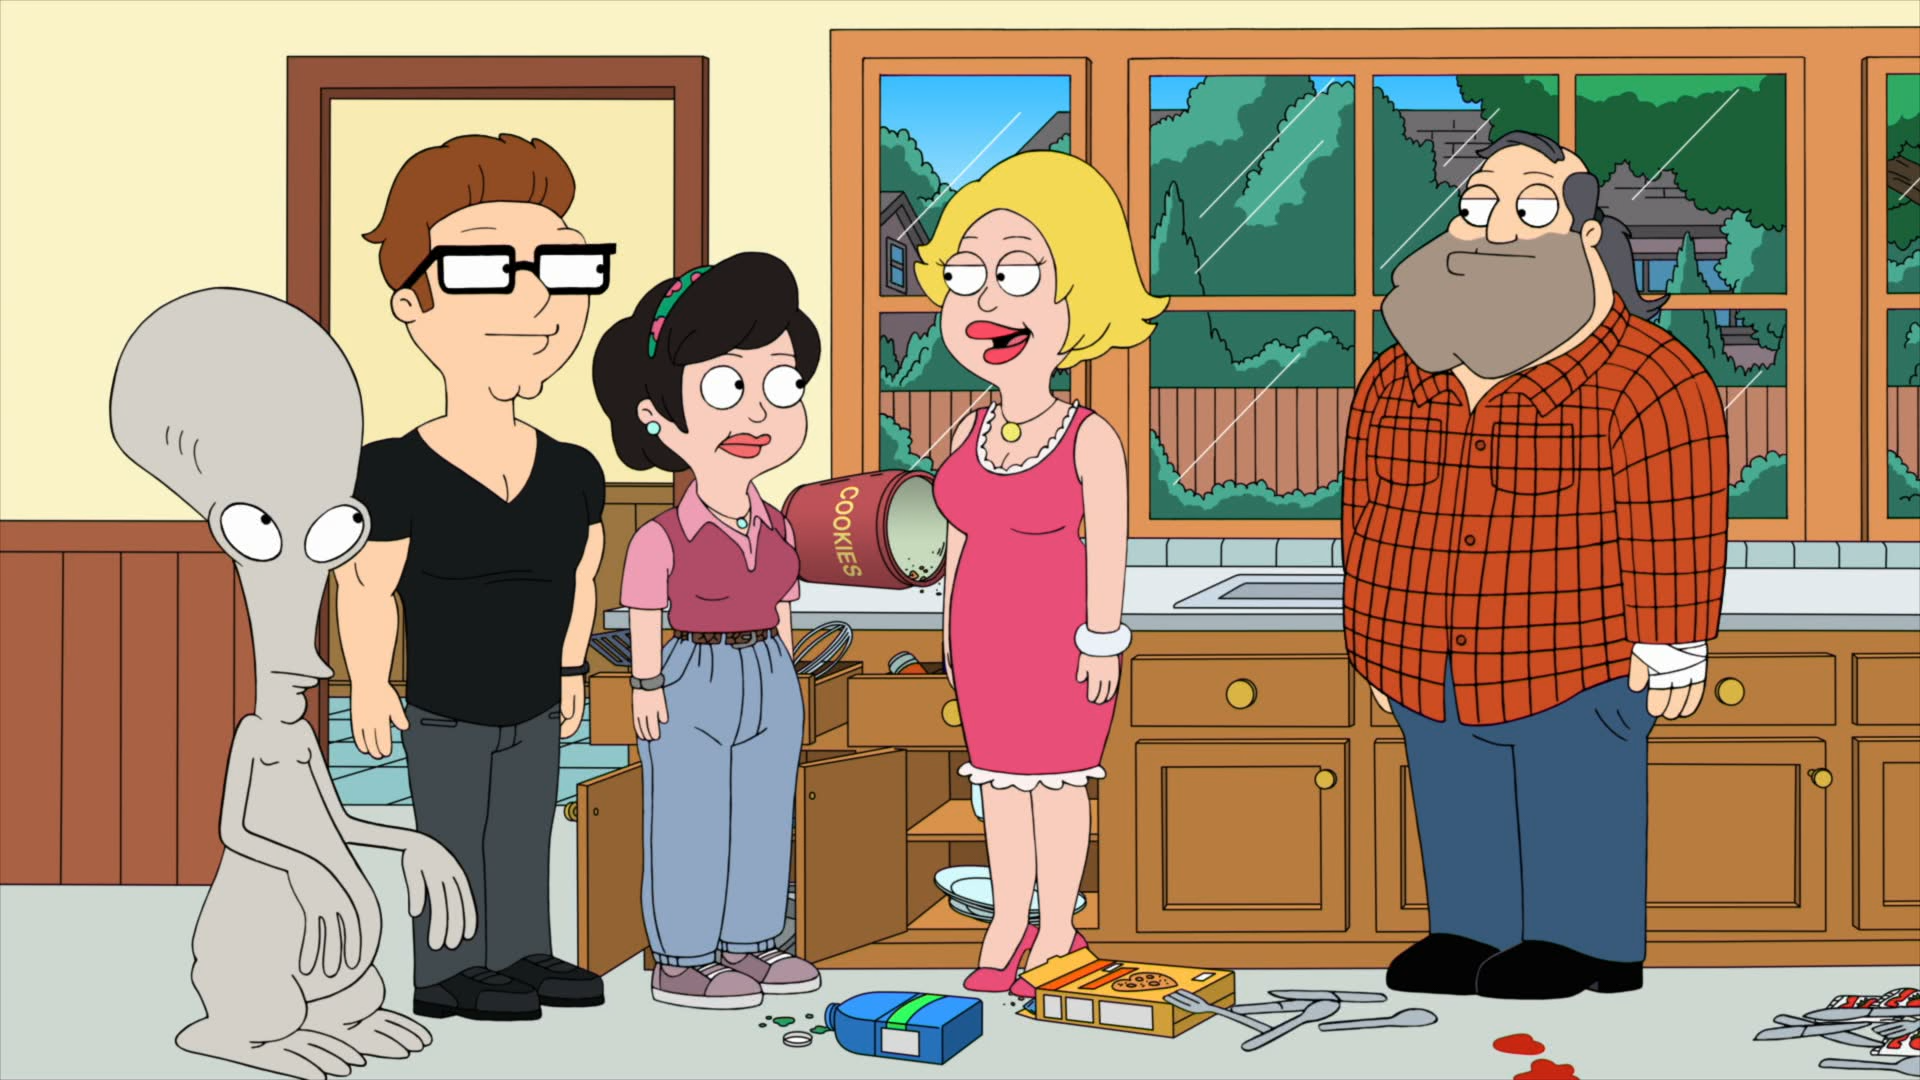 Image american dad screen 1 hosted in ImgPile.